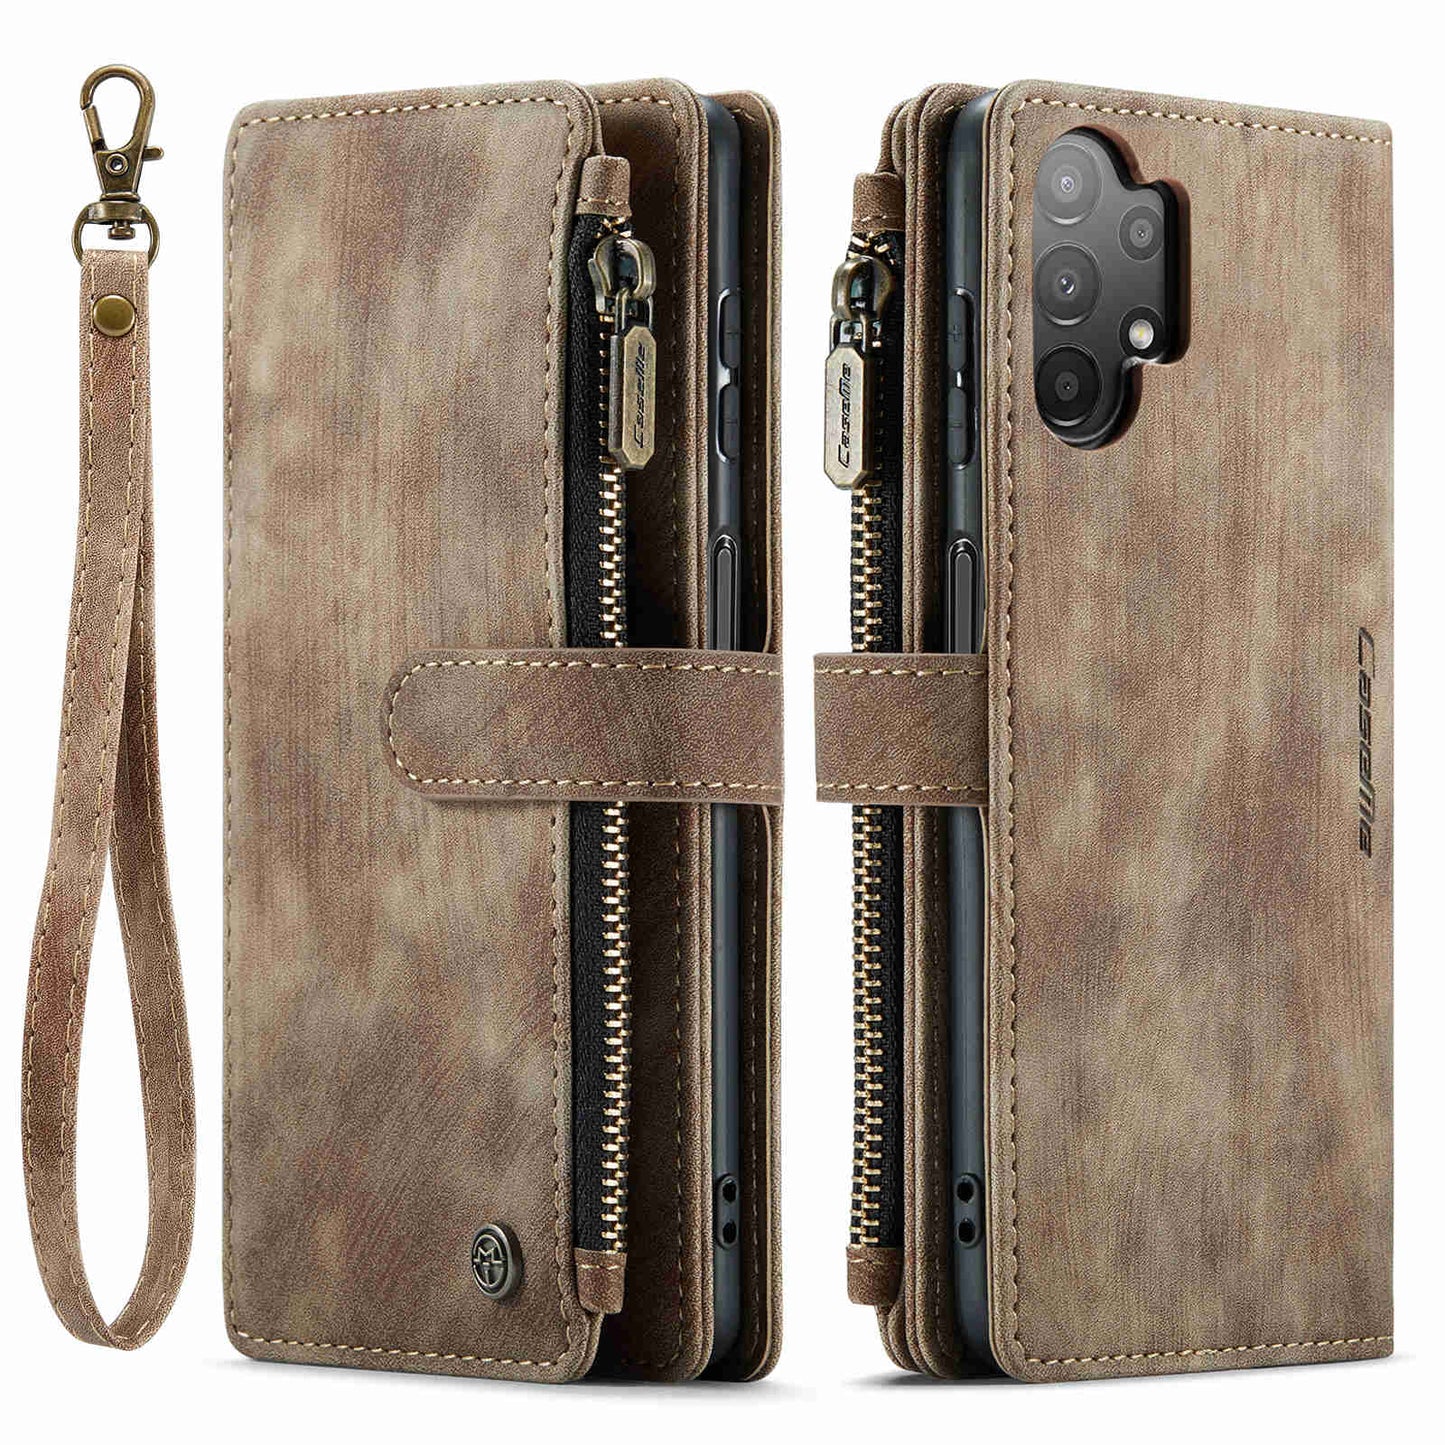 Suede Vintage Leather Cover Phone case